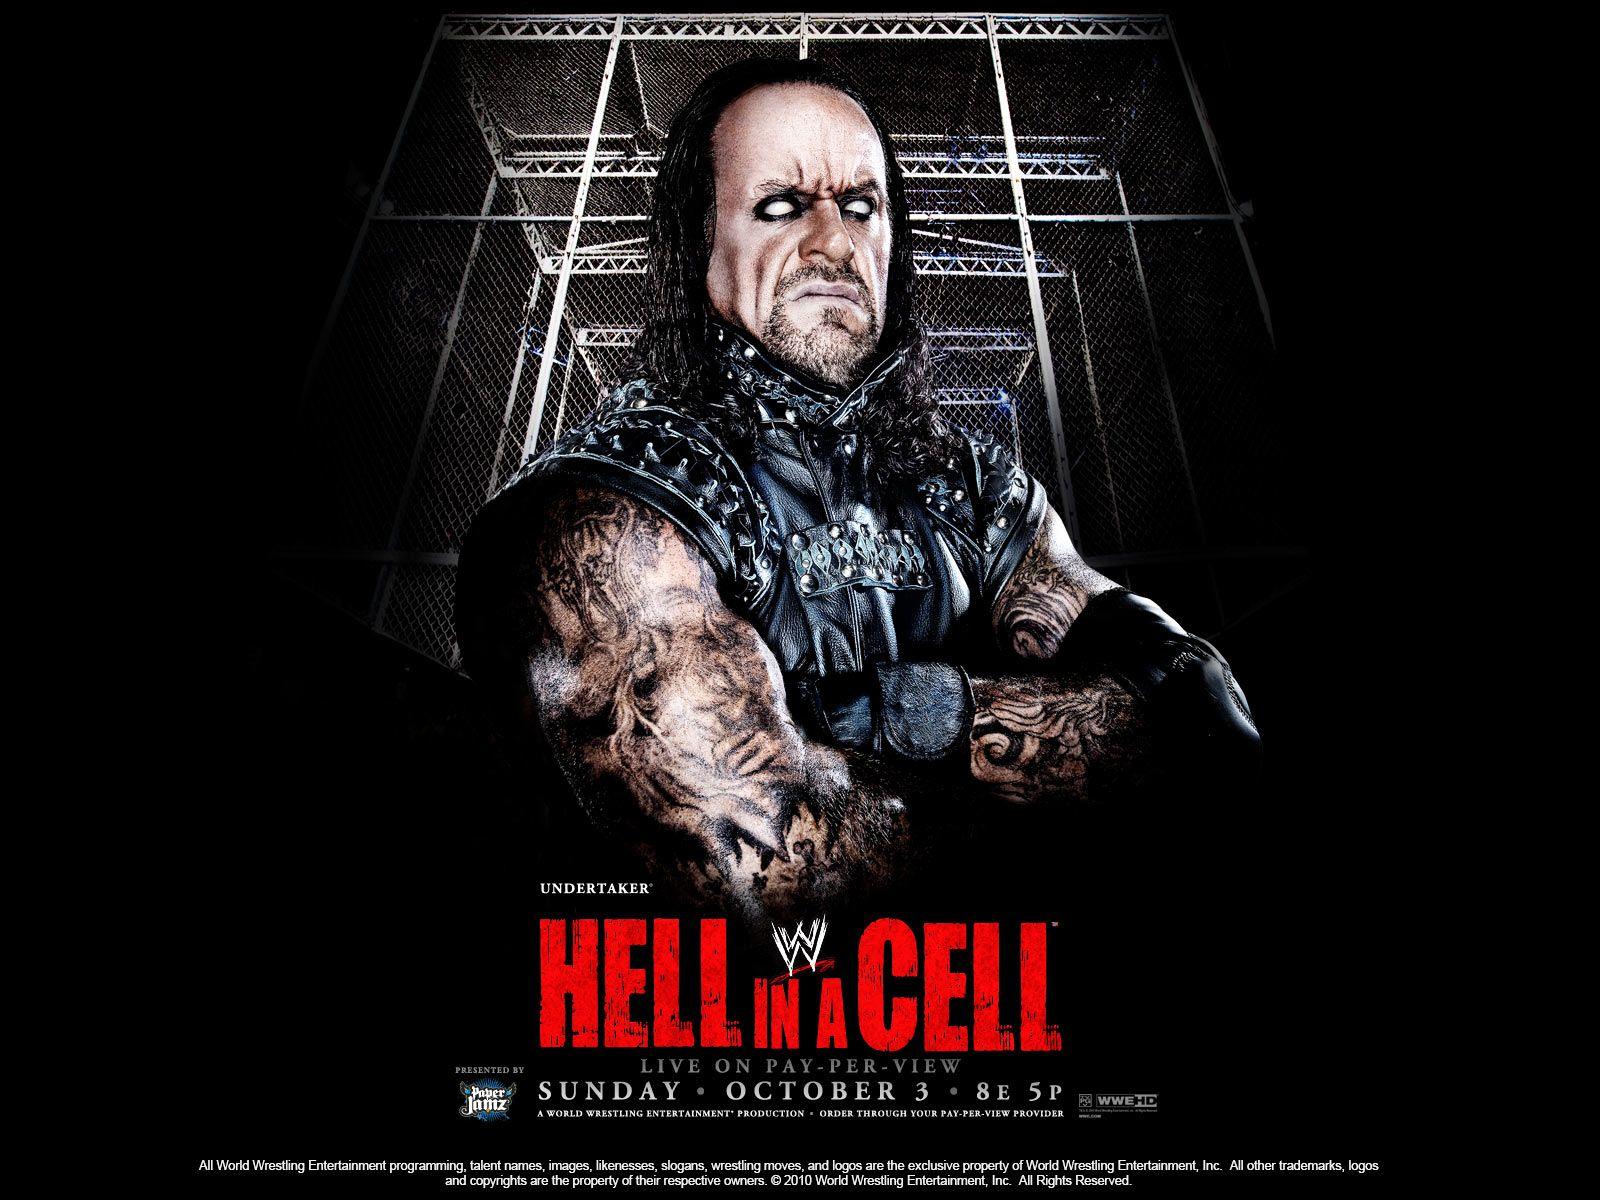 Hell in a Cell 2010 WWE PPV with The Undertaker